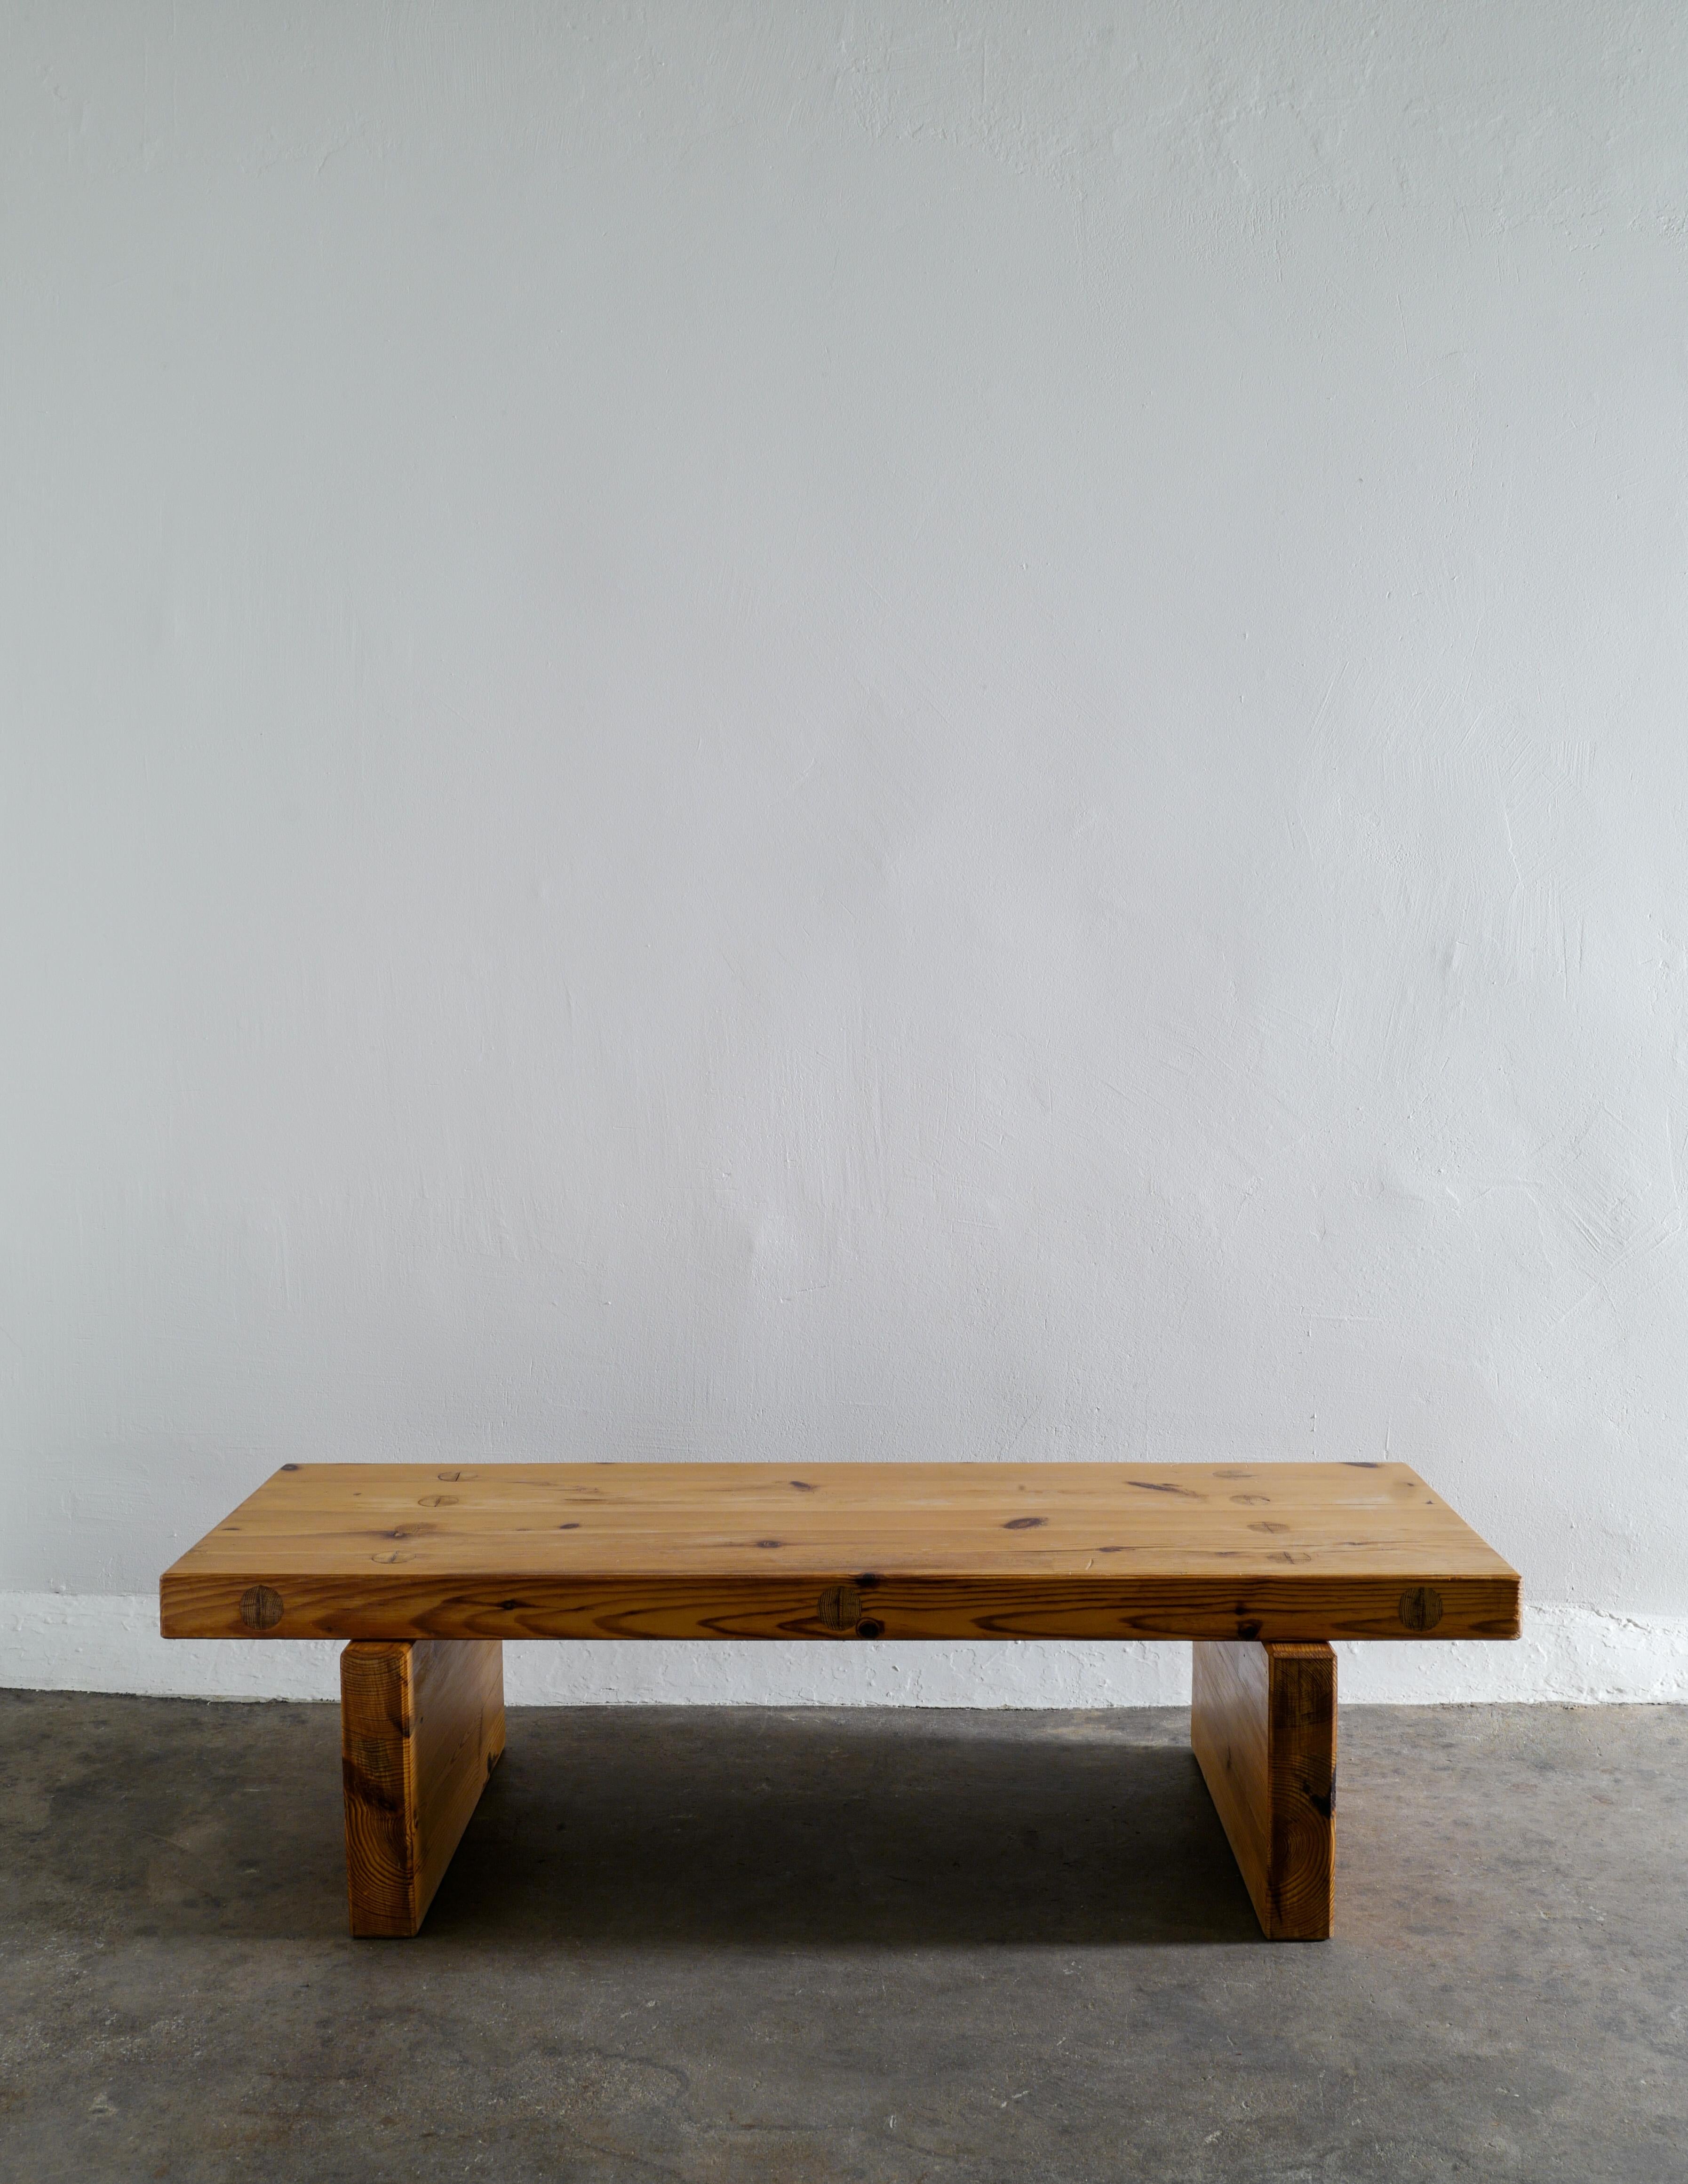 Rare mid century bench / coffee table in solid stained pine designed and produced by Roland Wilhelmsson dated March 1970. In good vintage and original condition with patina from age and use. Signed and dated. 

Dimensions: H: 35 cm W: 130 cm D: 49